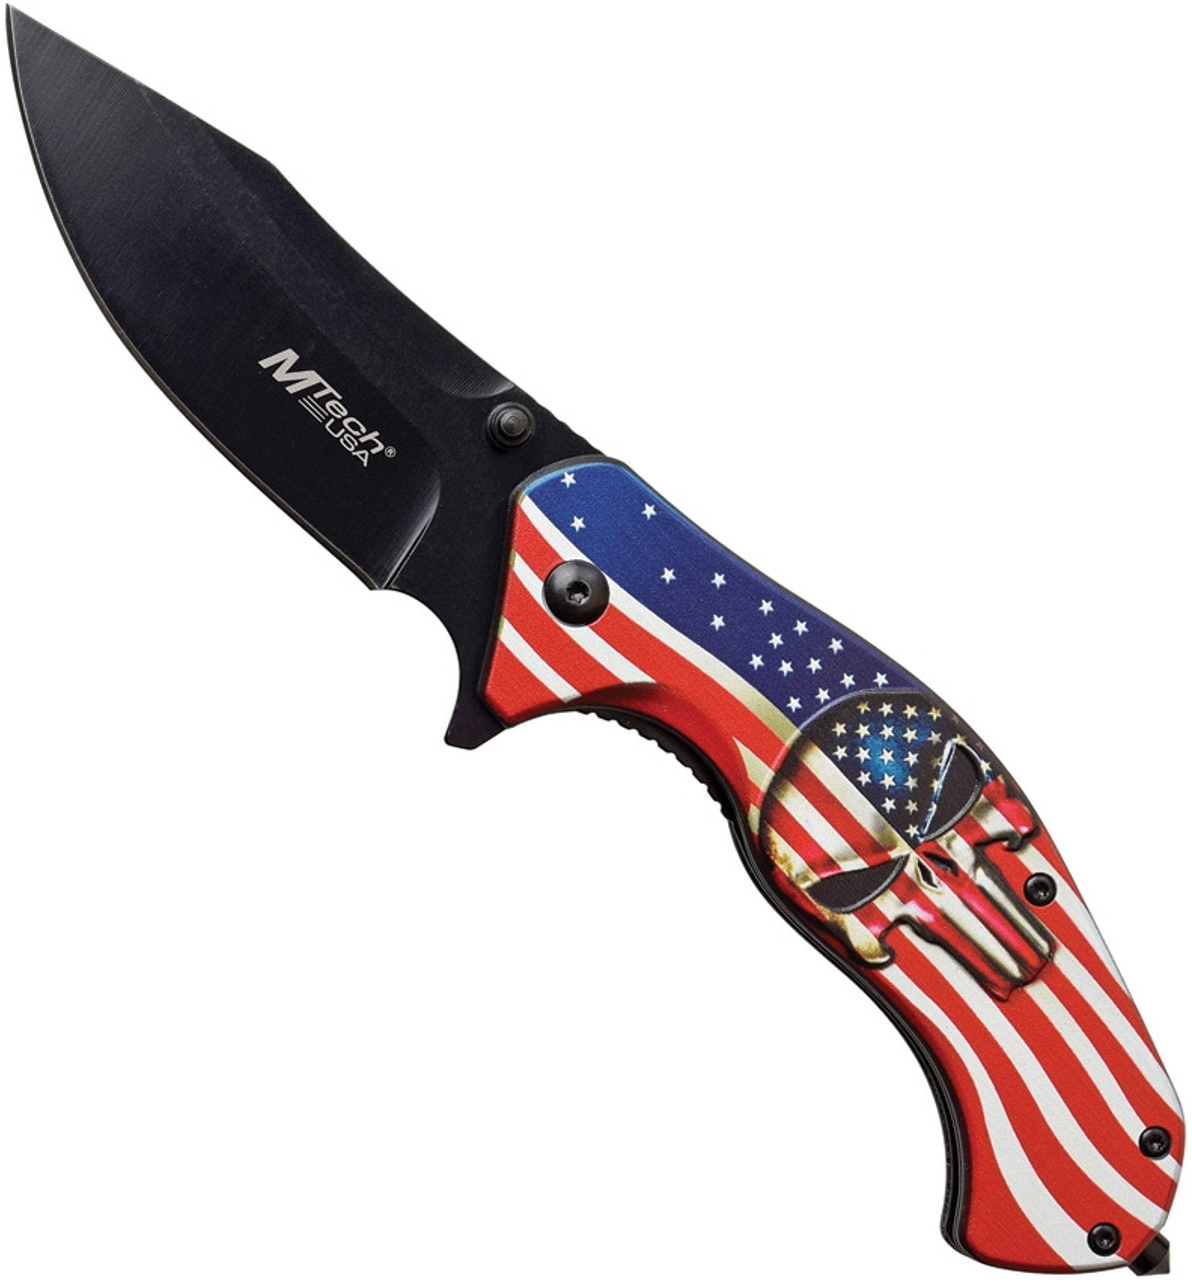 product image for Mtech MTA1025A Folding Knife with American Flag and Skull Handle, Black Finish